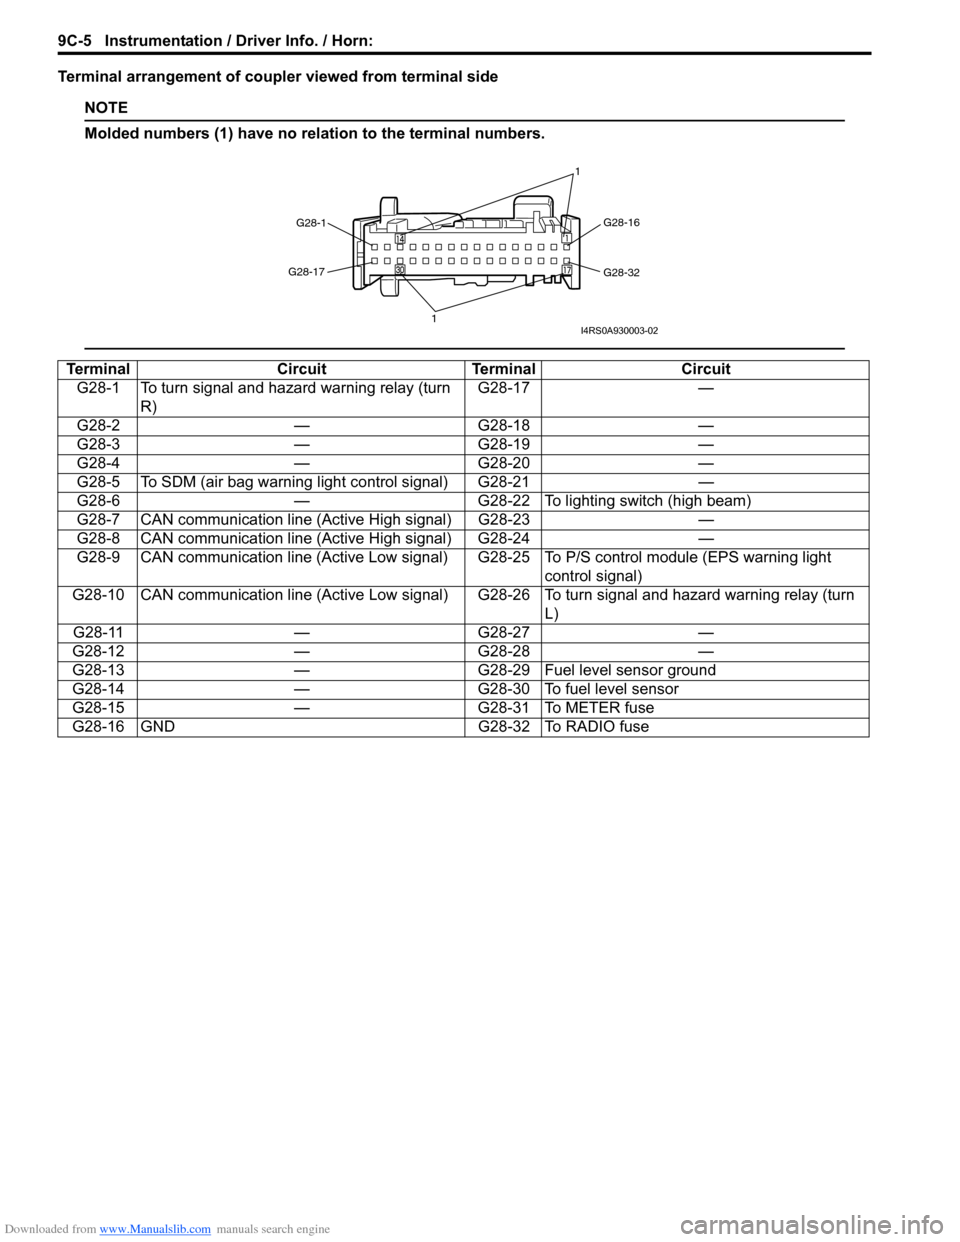 SUZUKI SWIFT 2008 2.G Service Owners Manual Downloaded from www.Manualslib.com manuals search engine 9C-5 Instrumentation / Driver Info. / Horn: 
Terminal arrangement of coupler viewed from terminal side
NOTE
Molded numbers (1) have no relation